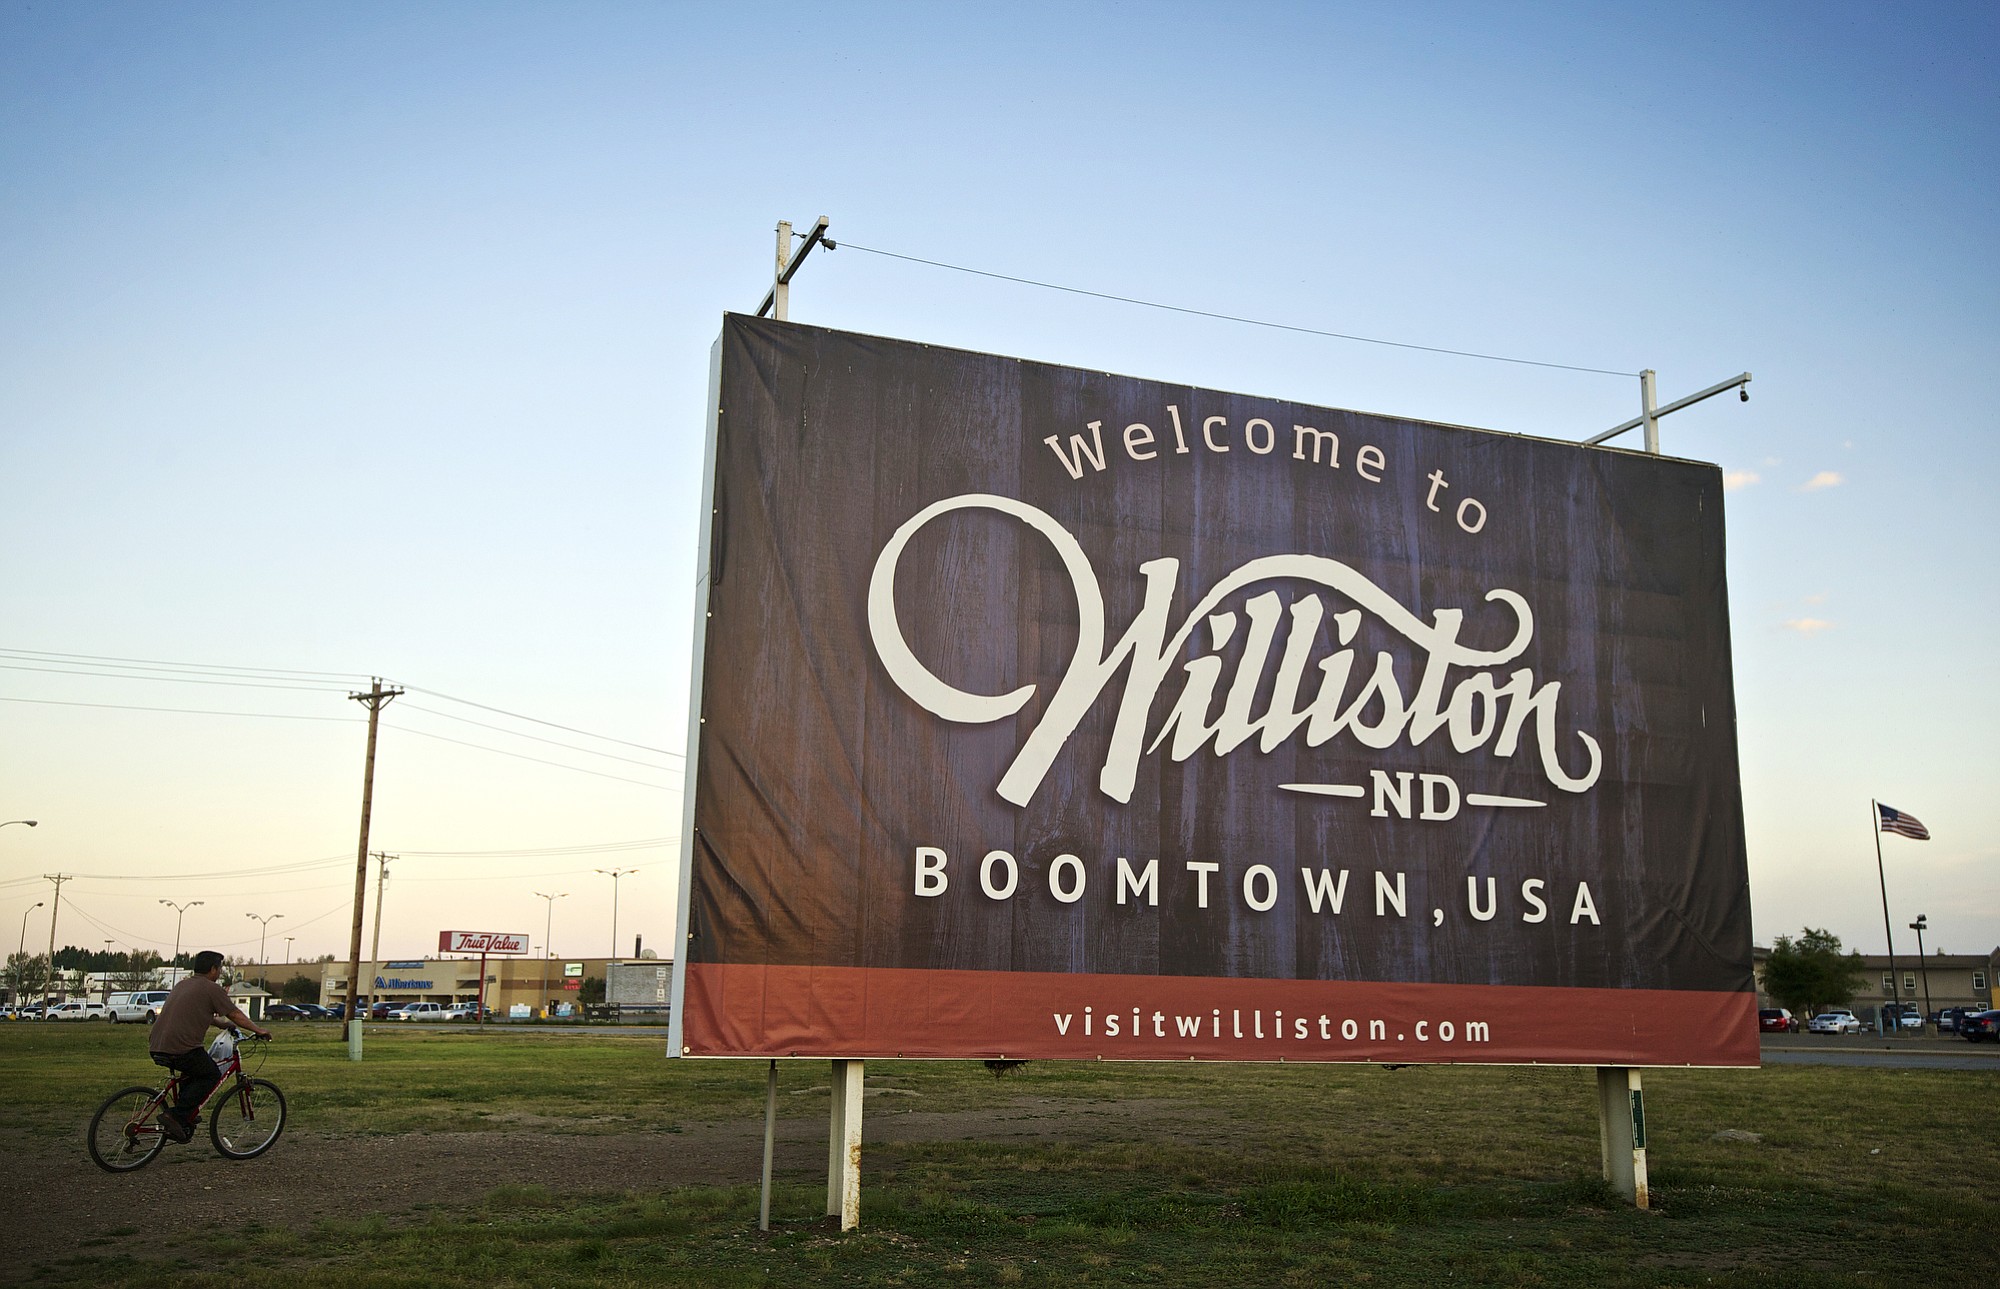 Columbian files
Williston, in the heart of North Dakota's oil boom, would be point of origination for oil that would travel by rail to the Port of Vancouver under a proposal by Tesoro Corp. and Savage Companies to build an oil transfer terminal at the port.